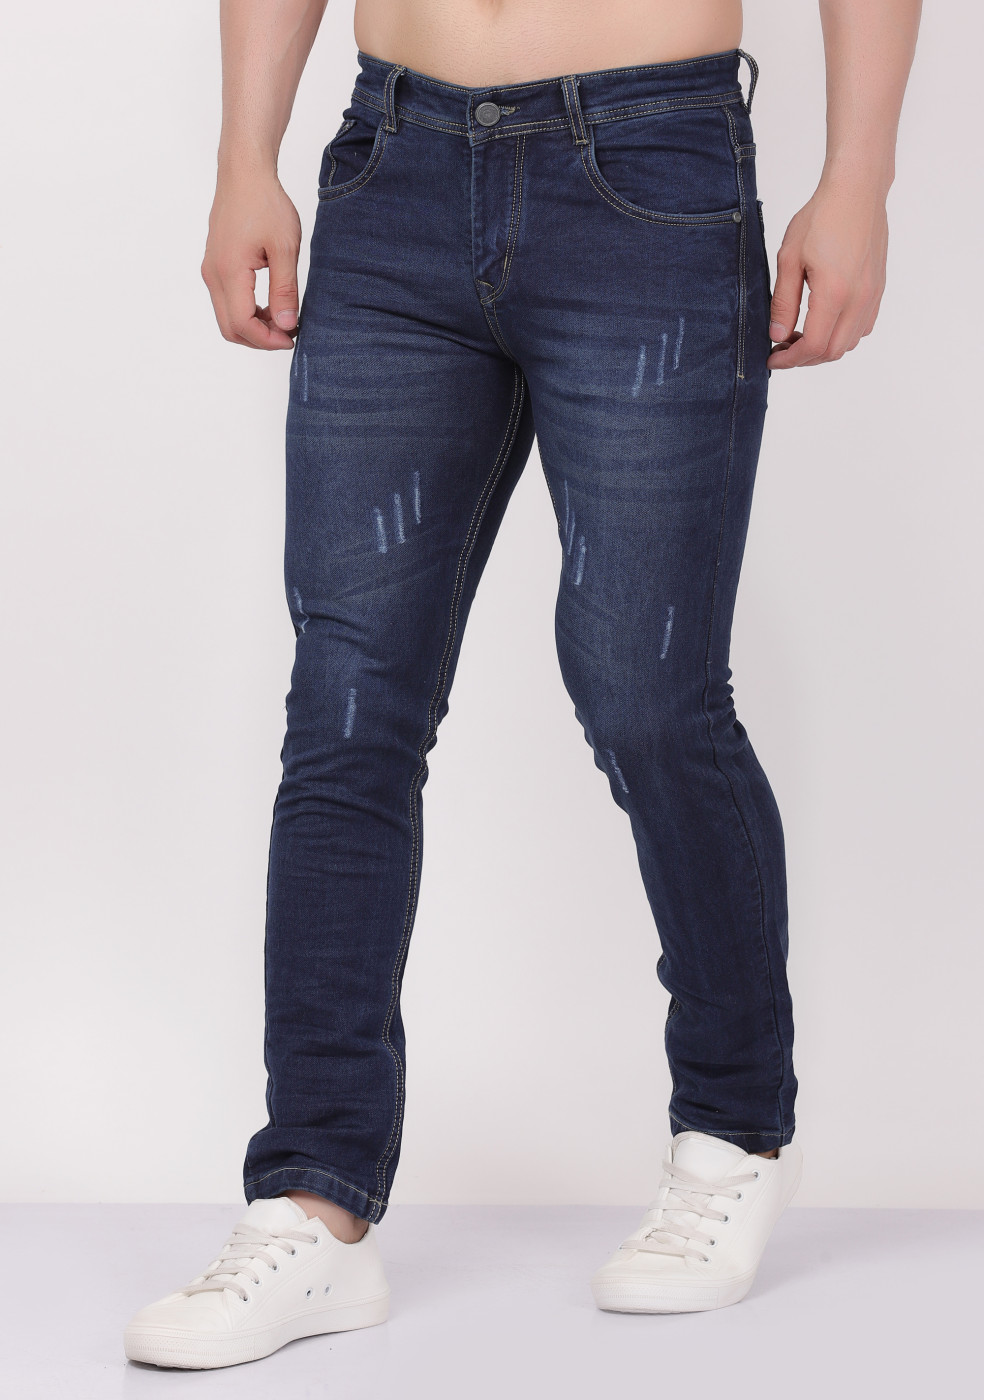 Buy Fashion Department Men Slim Fit Strecable Sky Blue Denim Damage Jeans  at Amazon.in